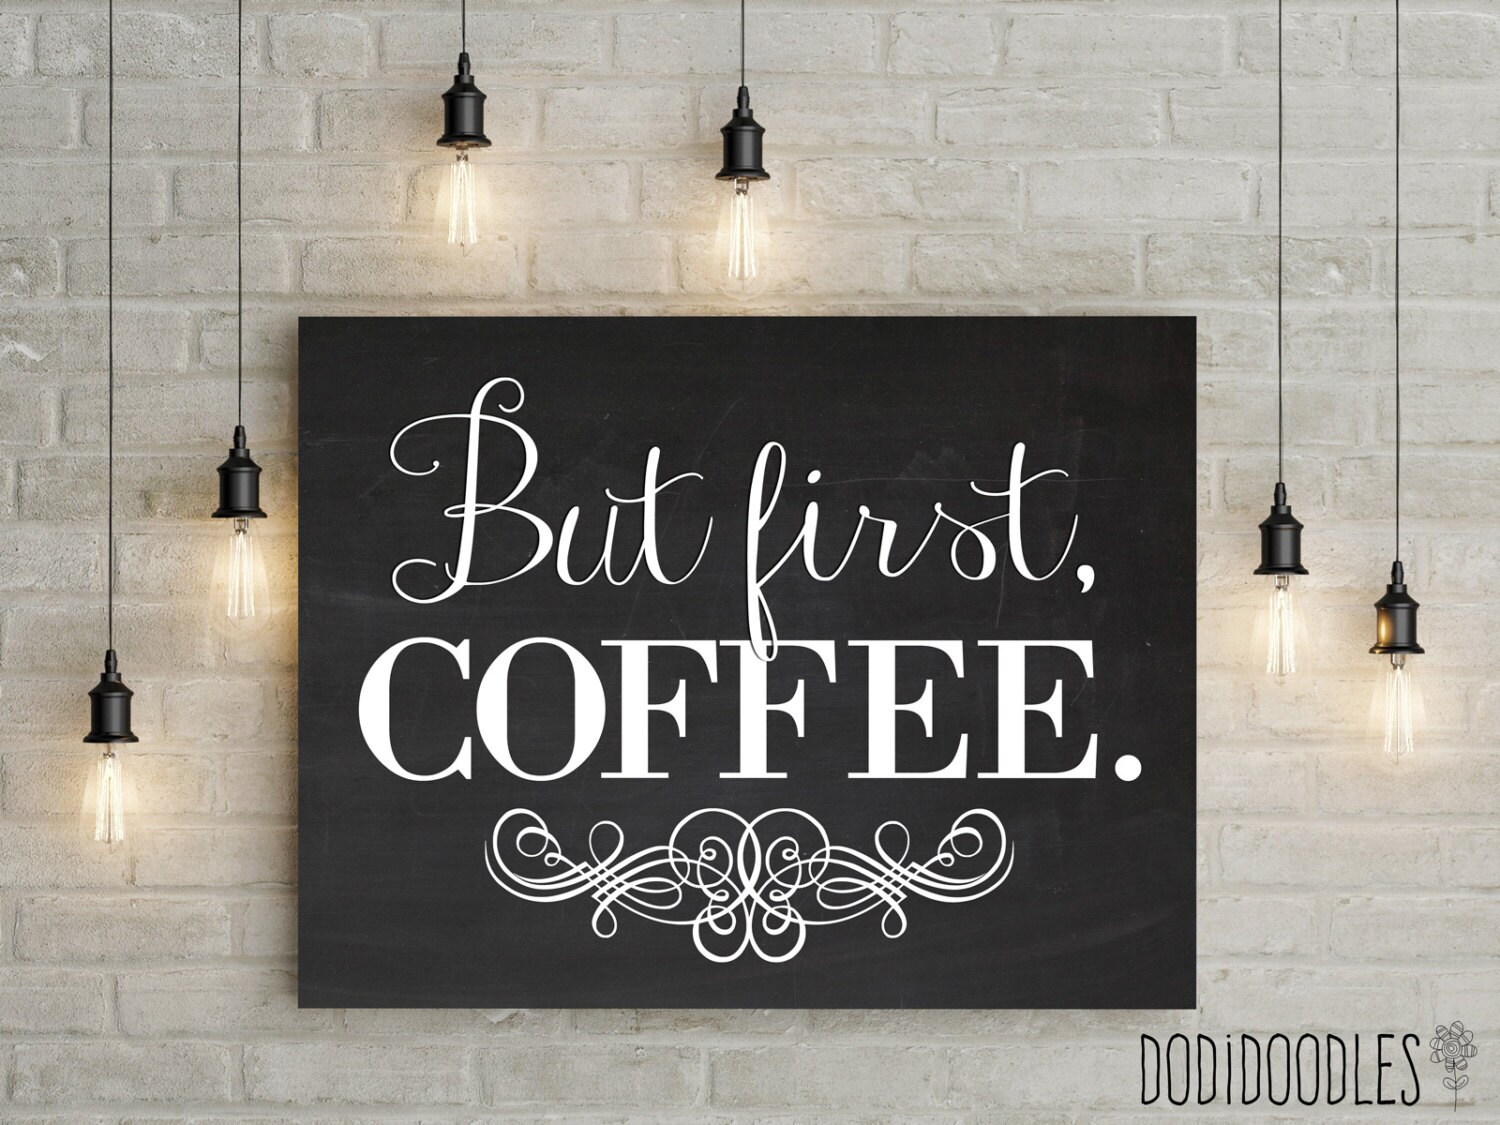 But first Coffee. My House my Rules my Coffee.